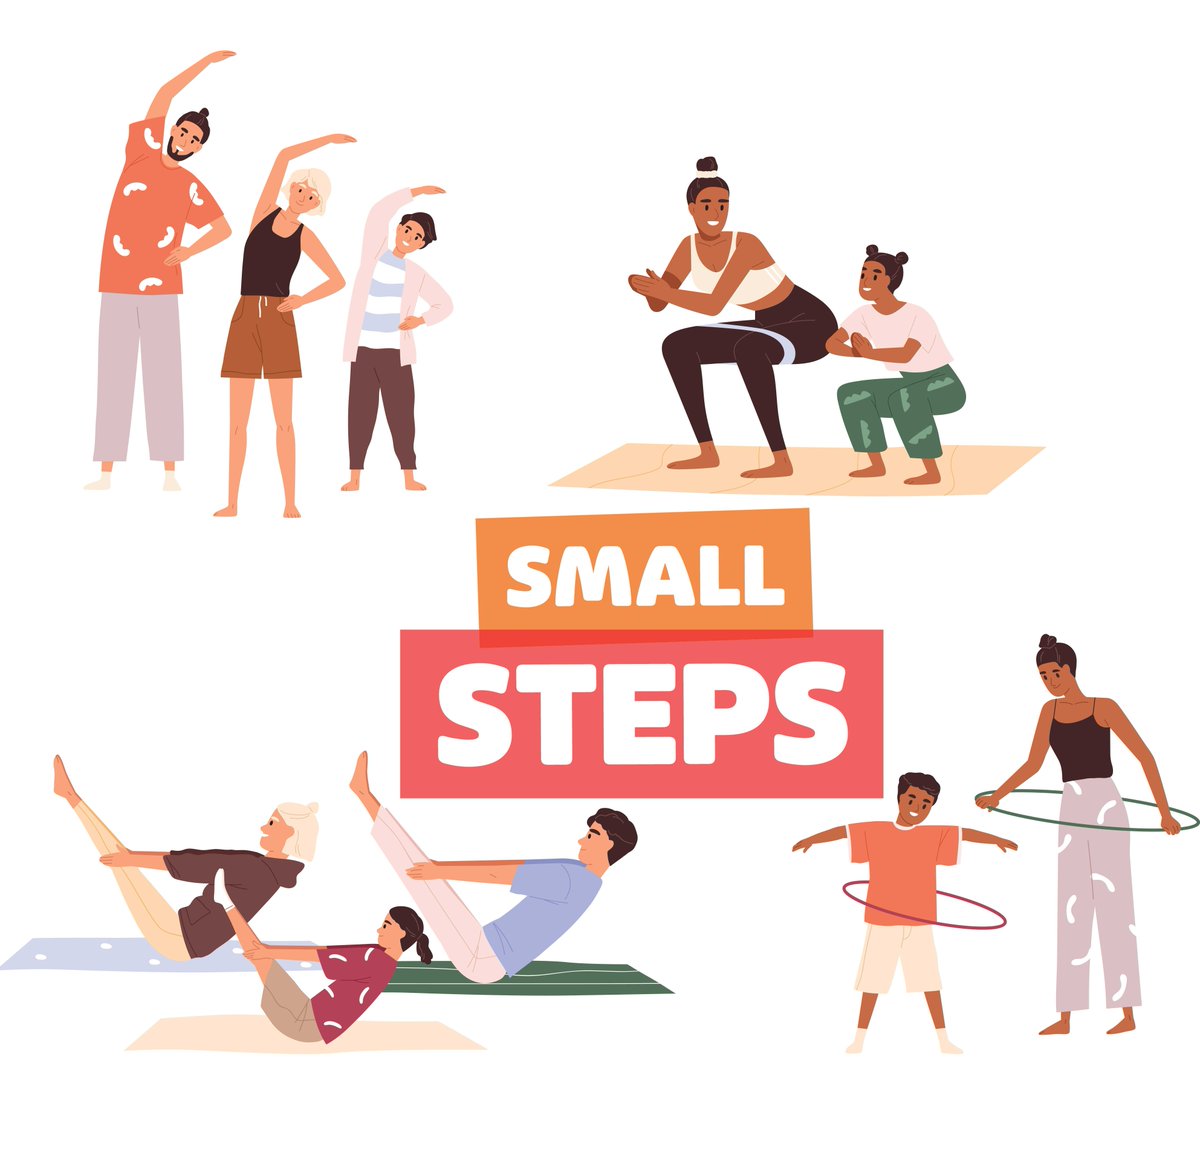 Take small steps to be active each day to improve your mental and physical wellbeing. Why not explore our parks, playgrounds and sports facilities at the weekends and after school/work? FInd out more here: loom.ly/9HepzY8